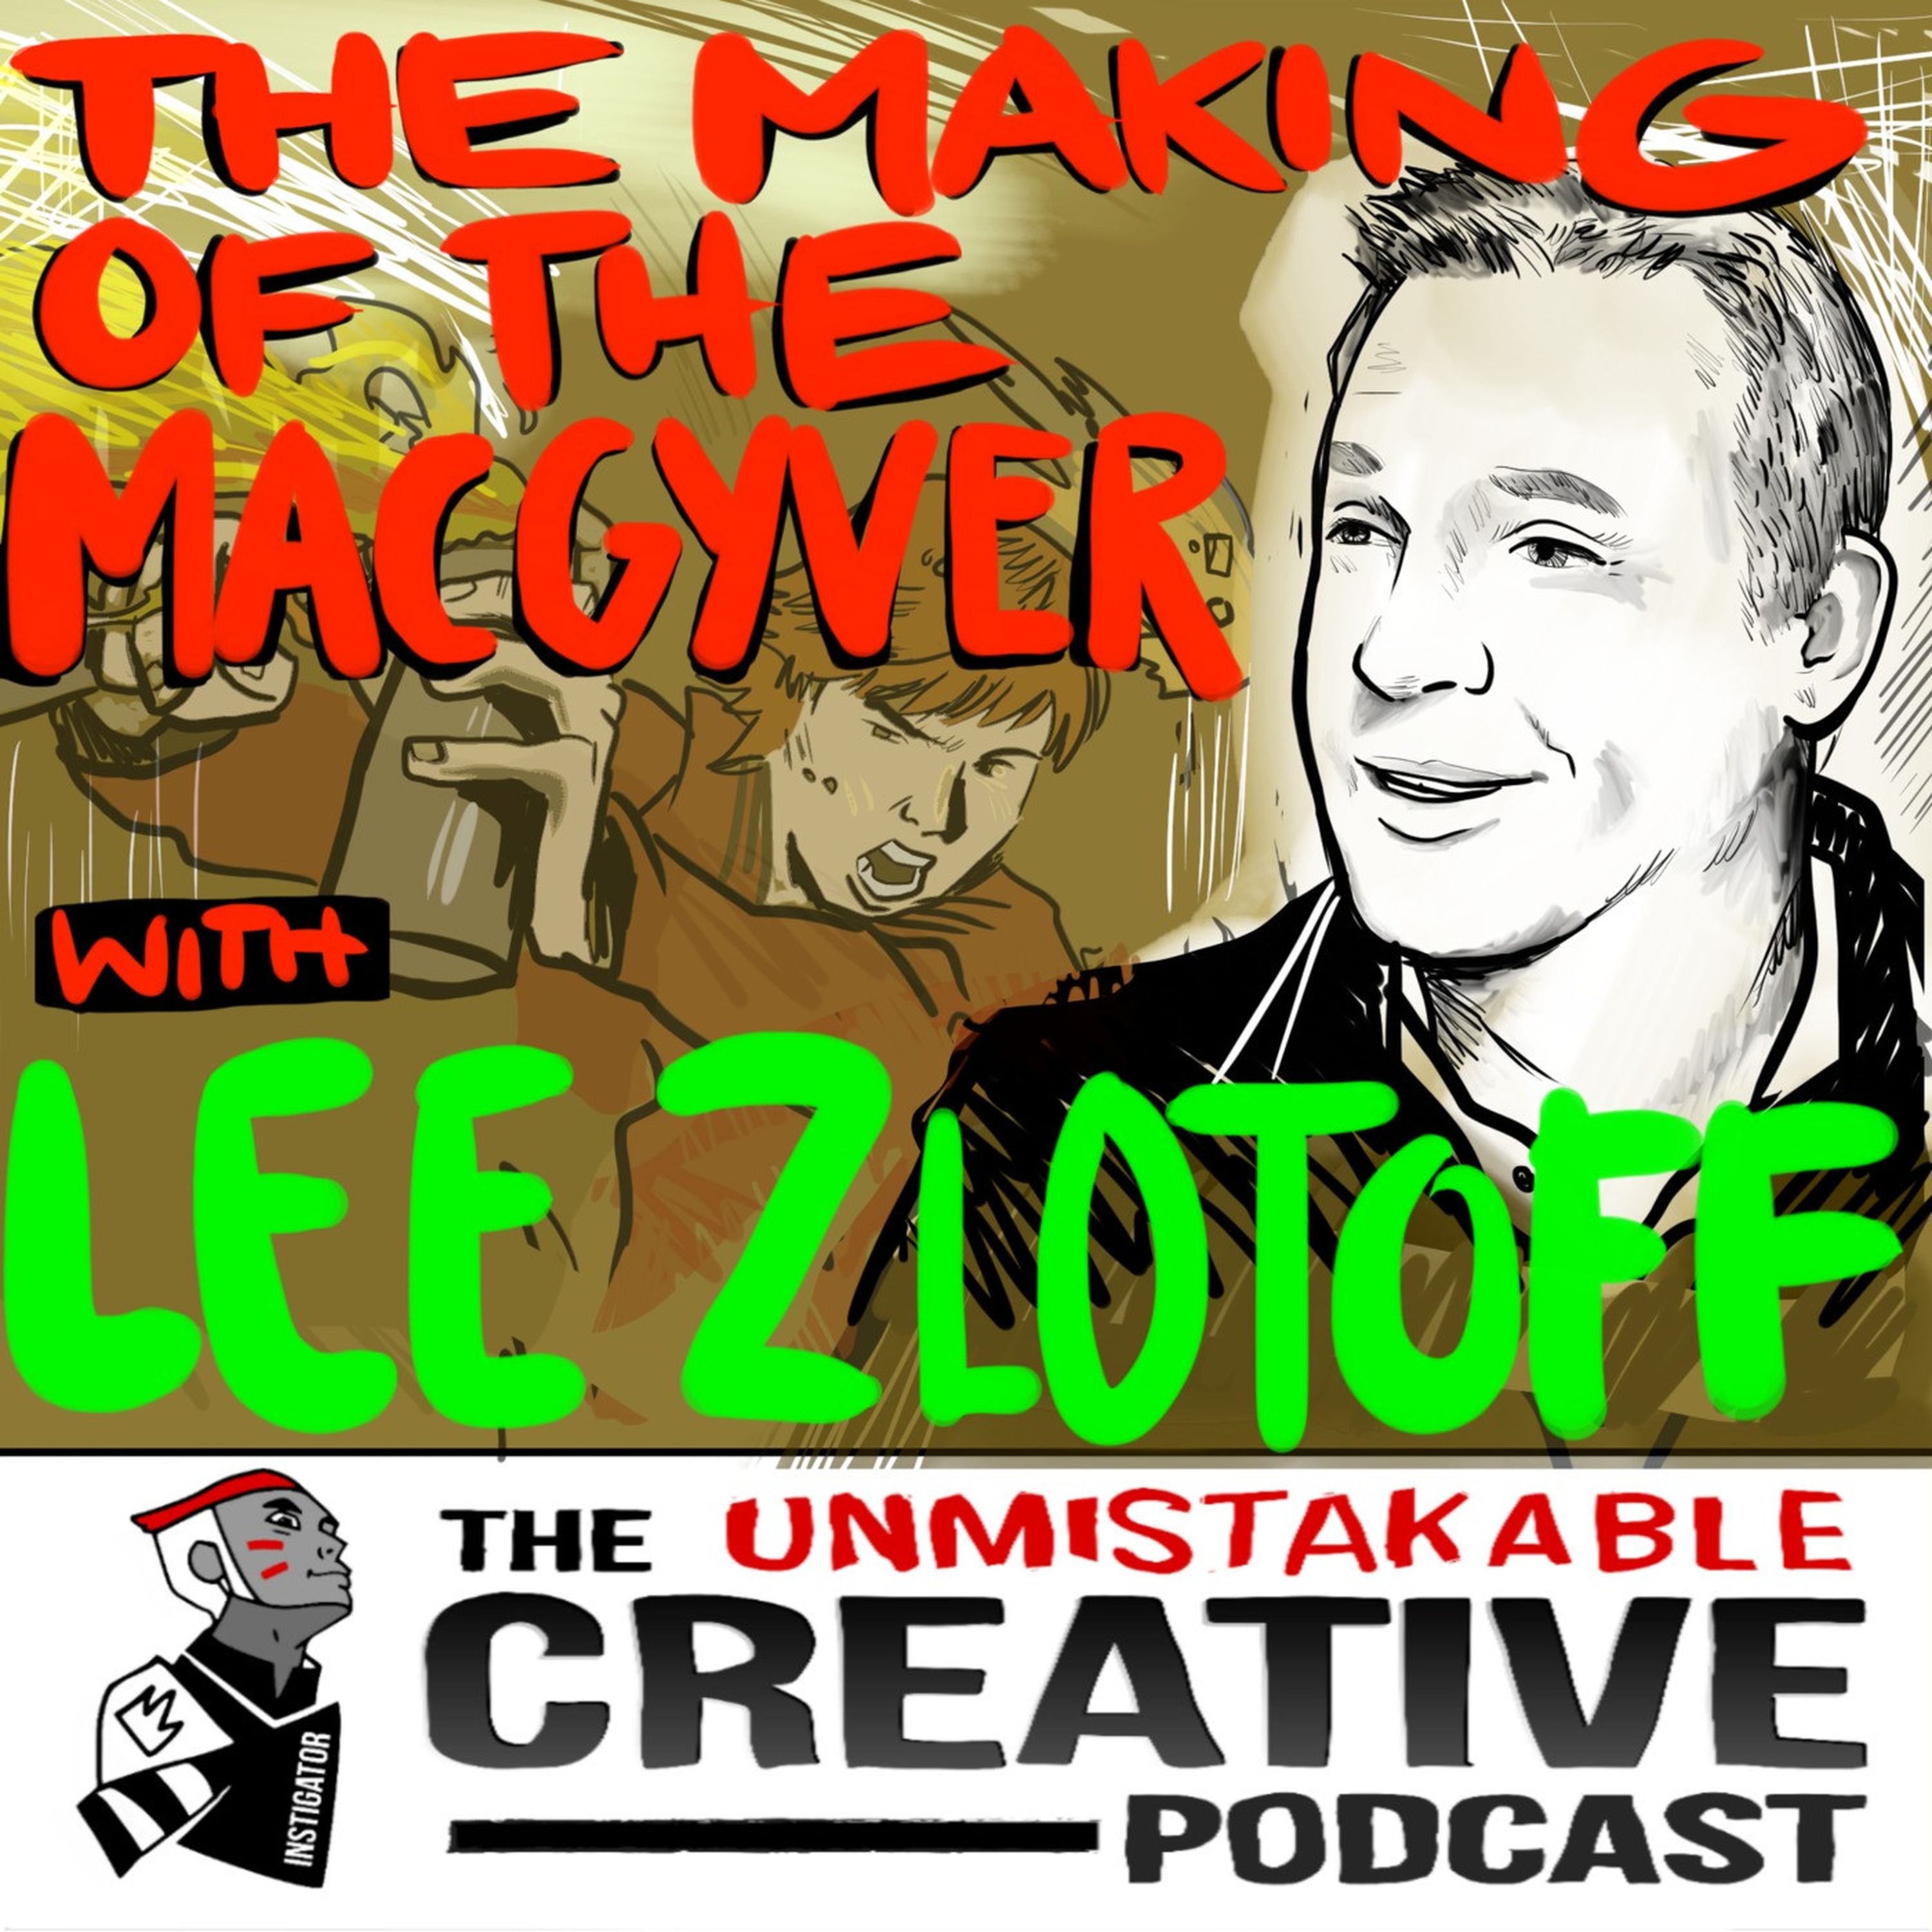 The Making of Macgyver With Lee Zlotoff Image